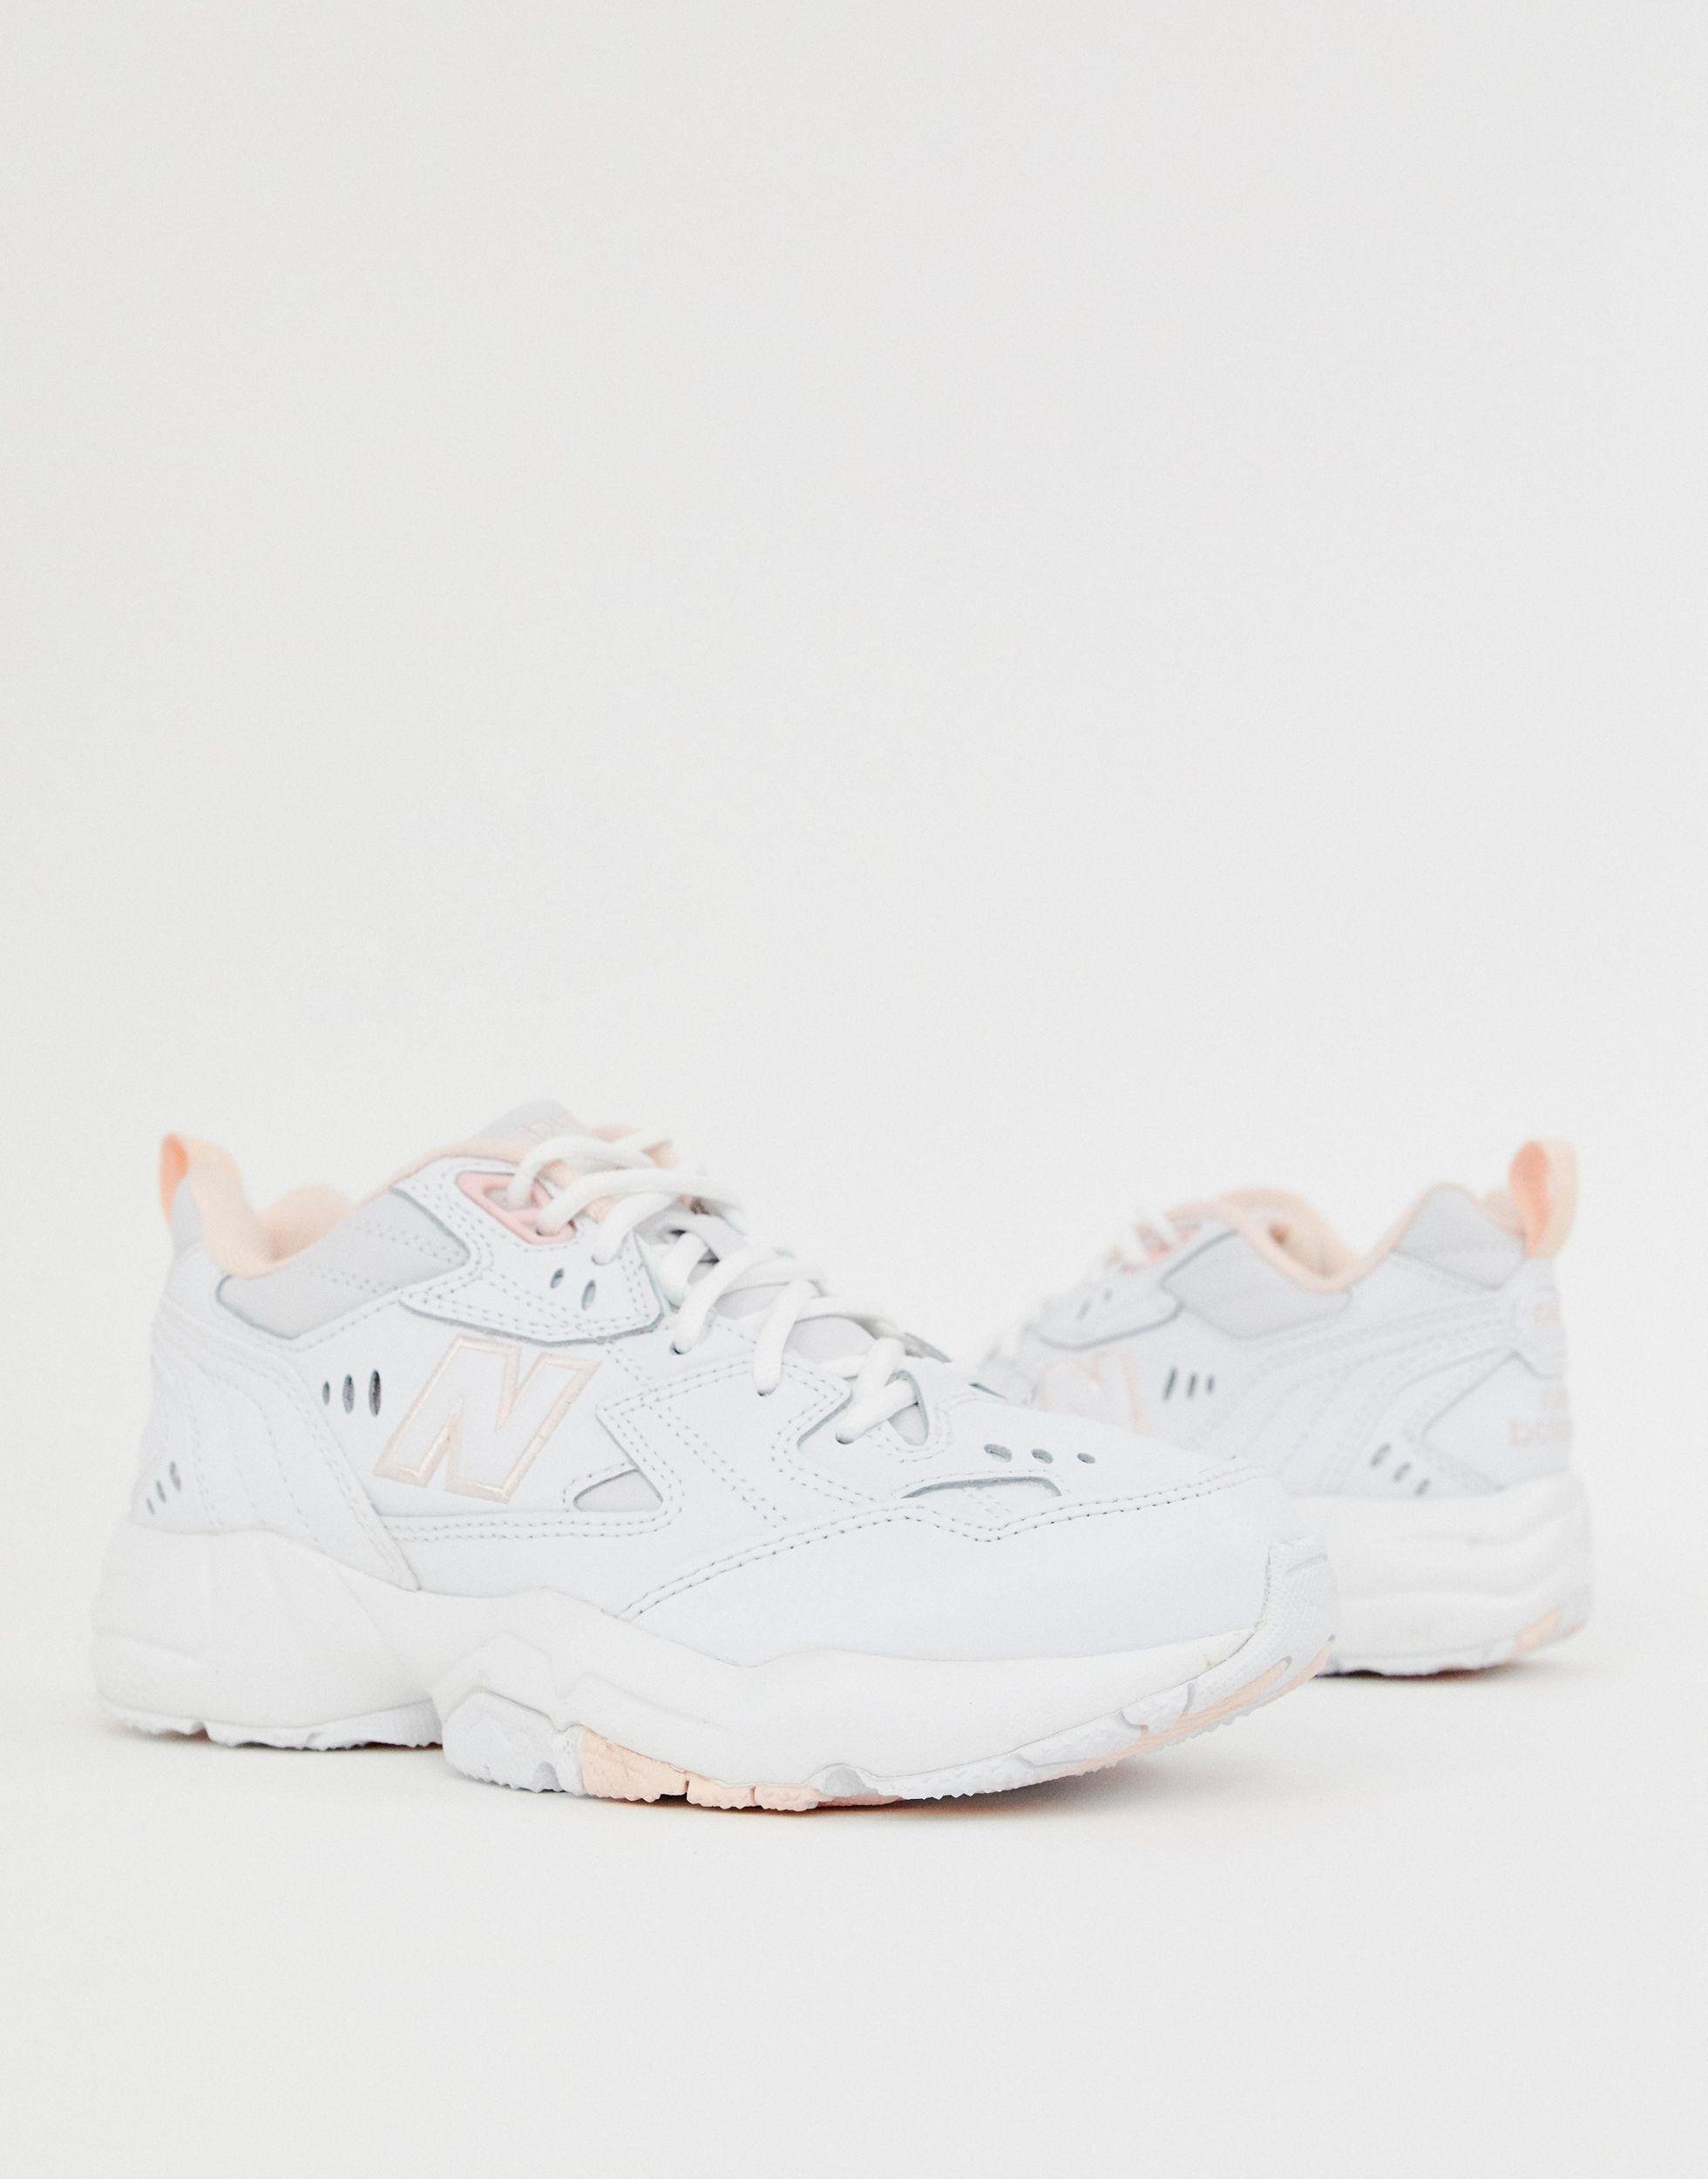 Thought Middle mushroom New Balance 608 White And Chunky Trainers | Lyst